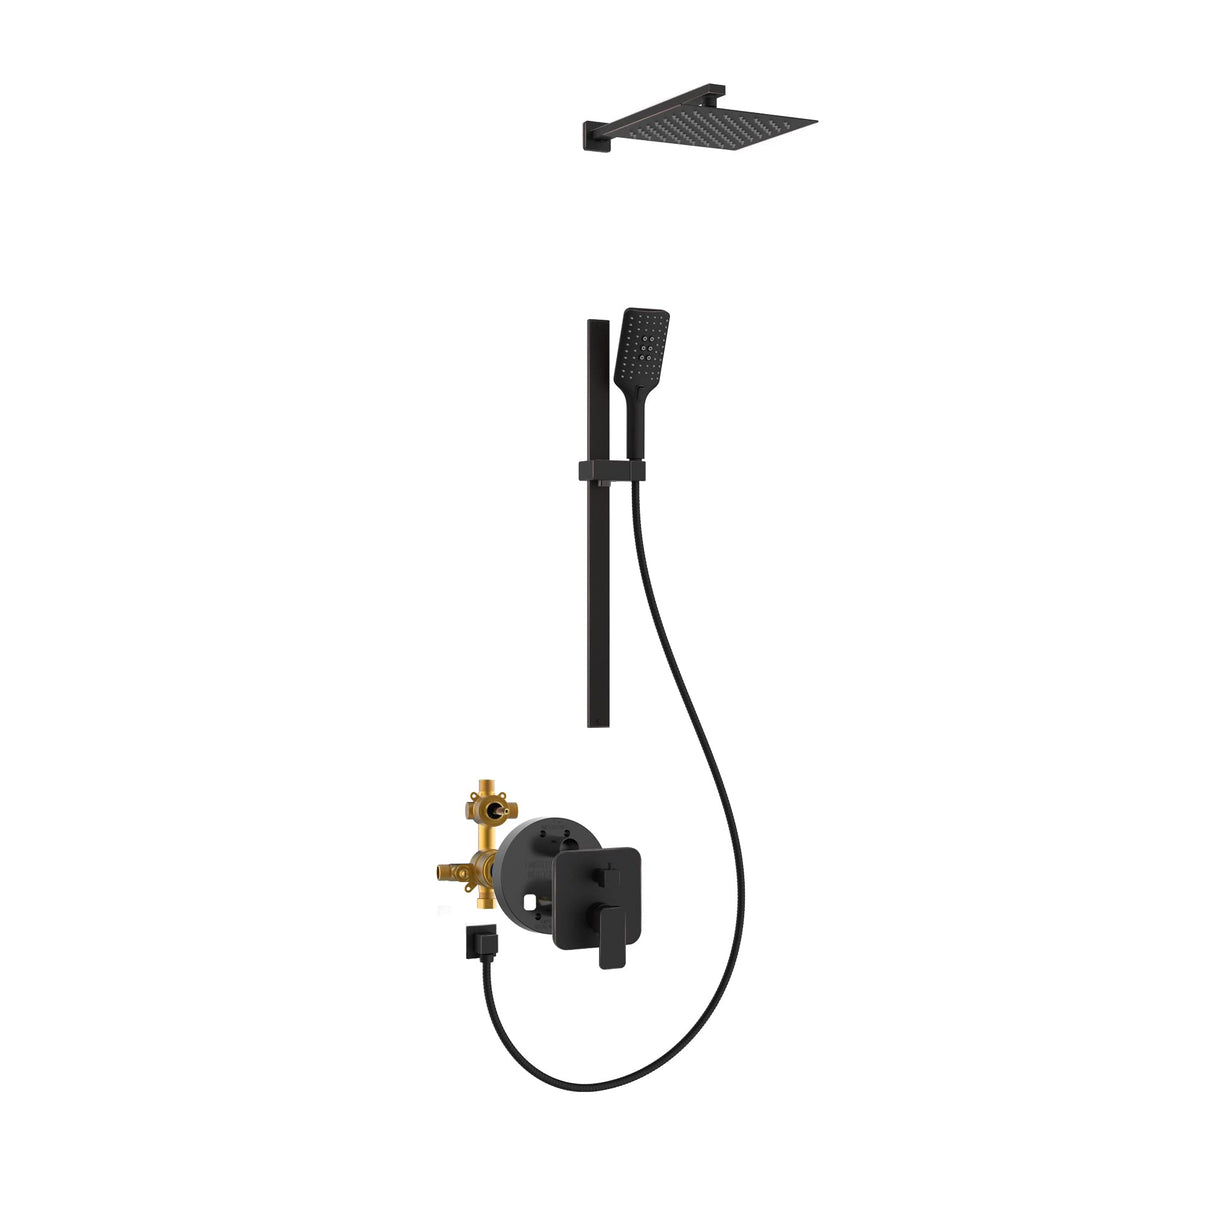 PULSE ShowerSpas 3008-ORB Oil-Rubbed Bronze Combo Shower System, 2.5 GPM